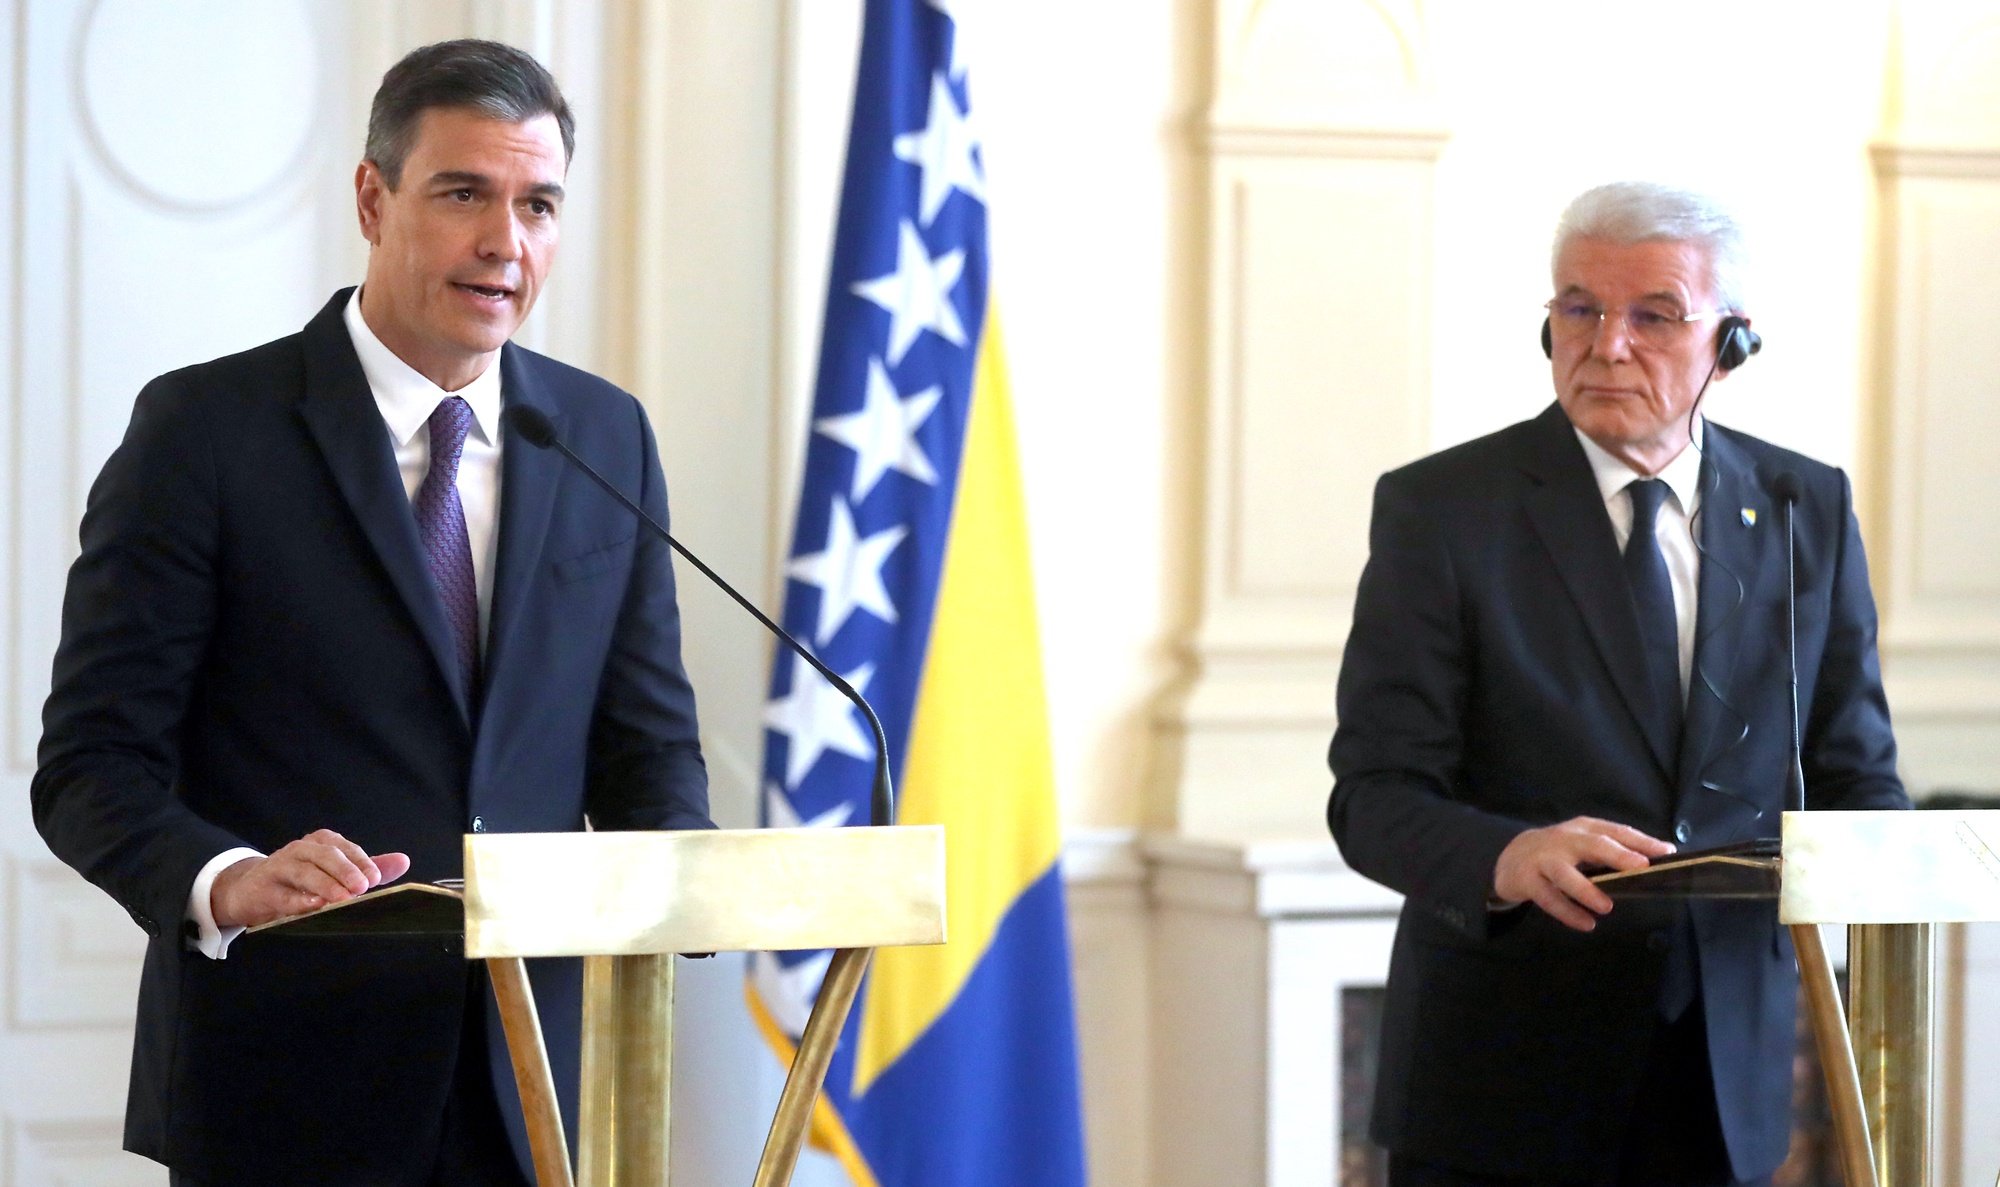 epa10098525 Chairman of the tripartite Presidency of Bosnia and Herzegovina Sefik Dzaferovic (R) and Spanish Prime Minister Pedro Sanchez (L) attend a joint press conference after a meeting in Sarajevo, Bosnia and Herzegovina, 30 July 2022. Sanchez is on an official state visit to Bosnia.  EPA/FEHIM DEMIR